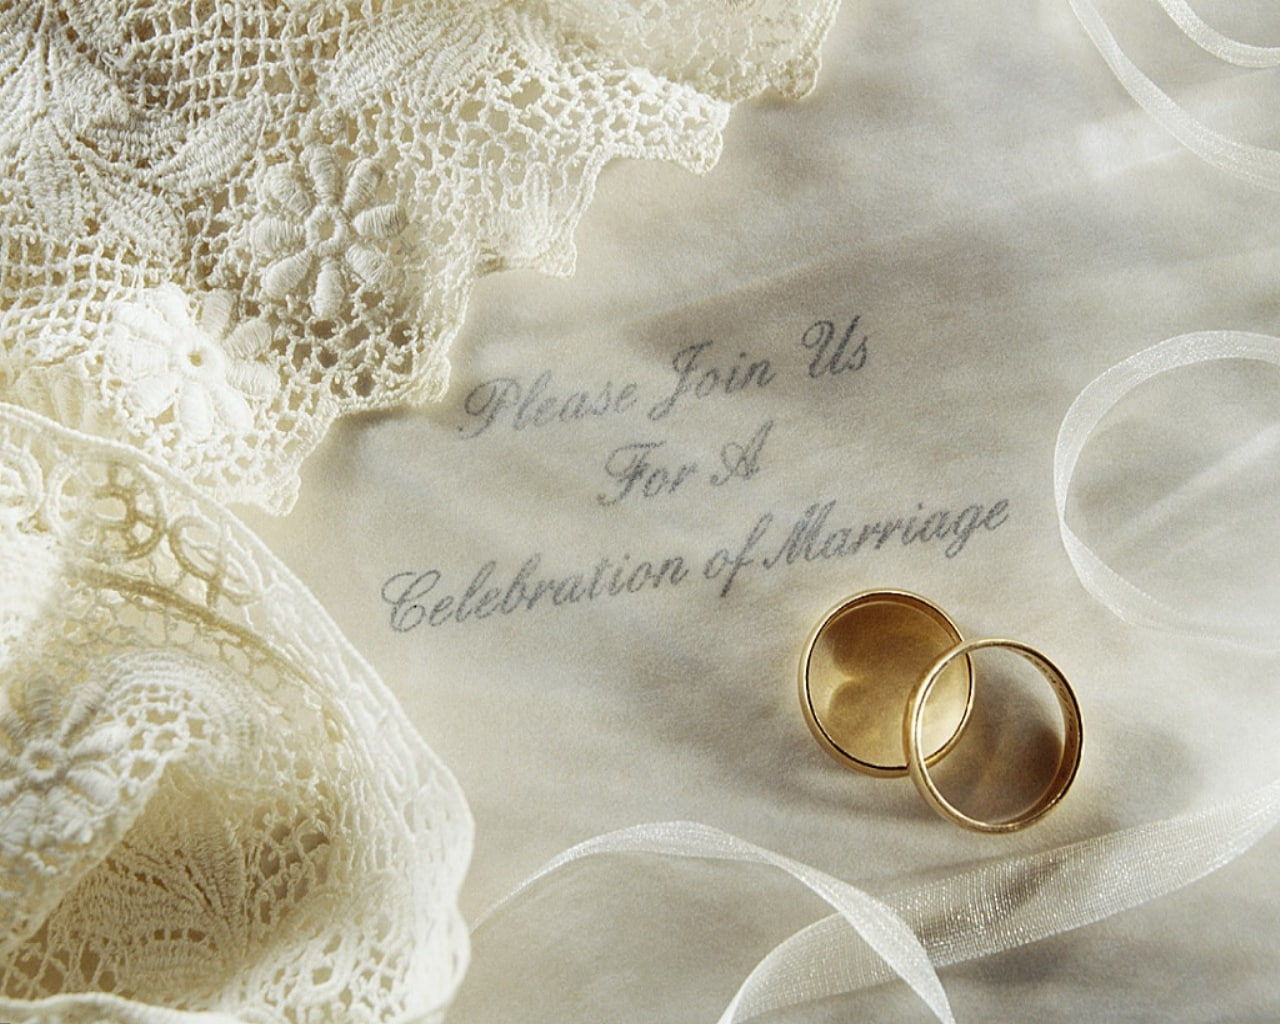 Wedding, Ring, Words, Marriage, Romance, Photography, Depth Of Field